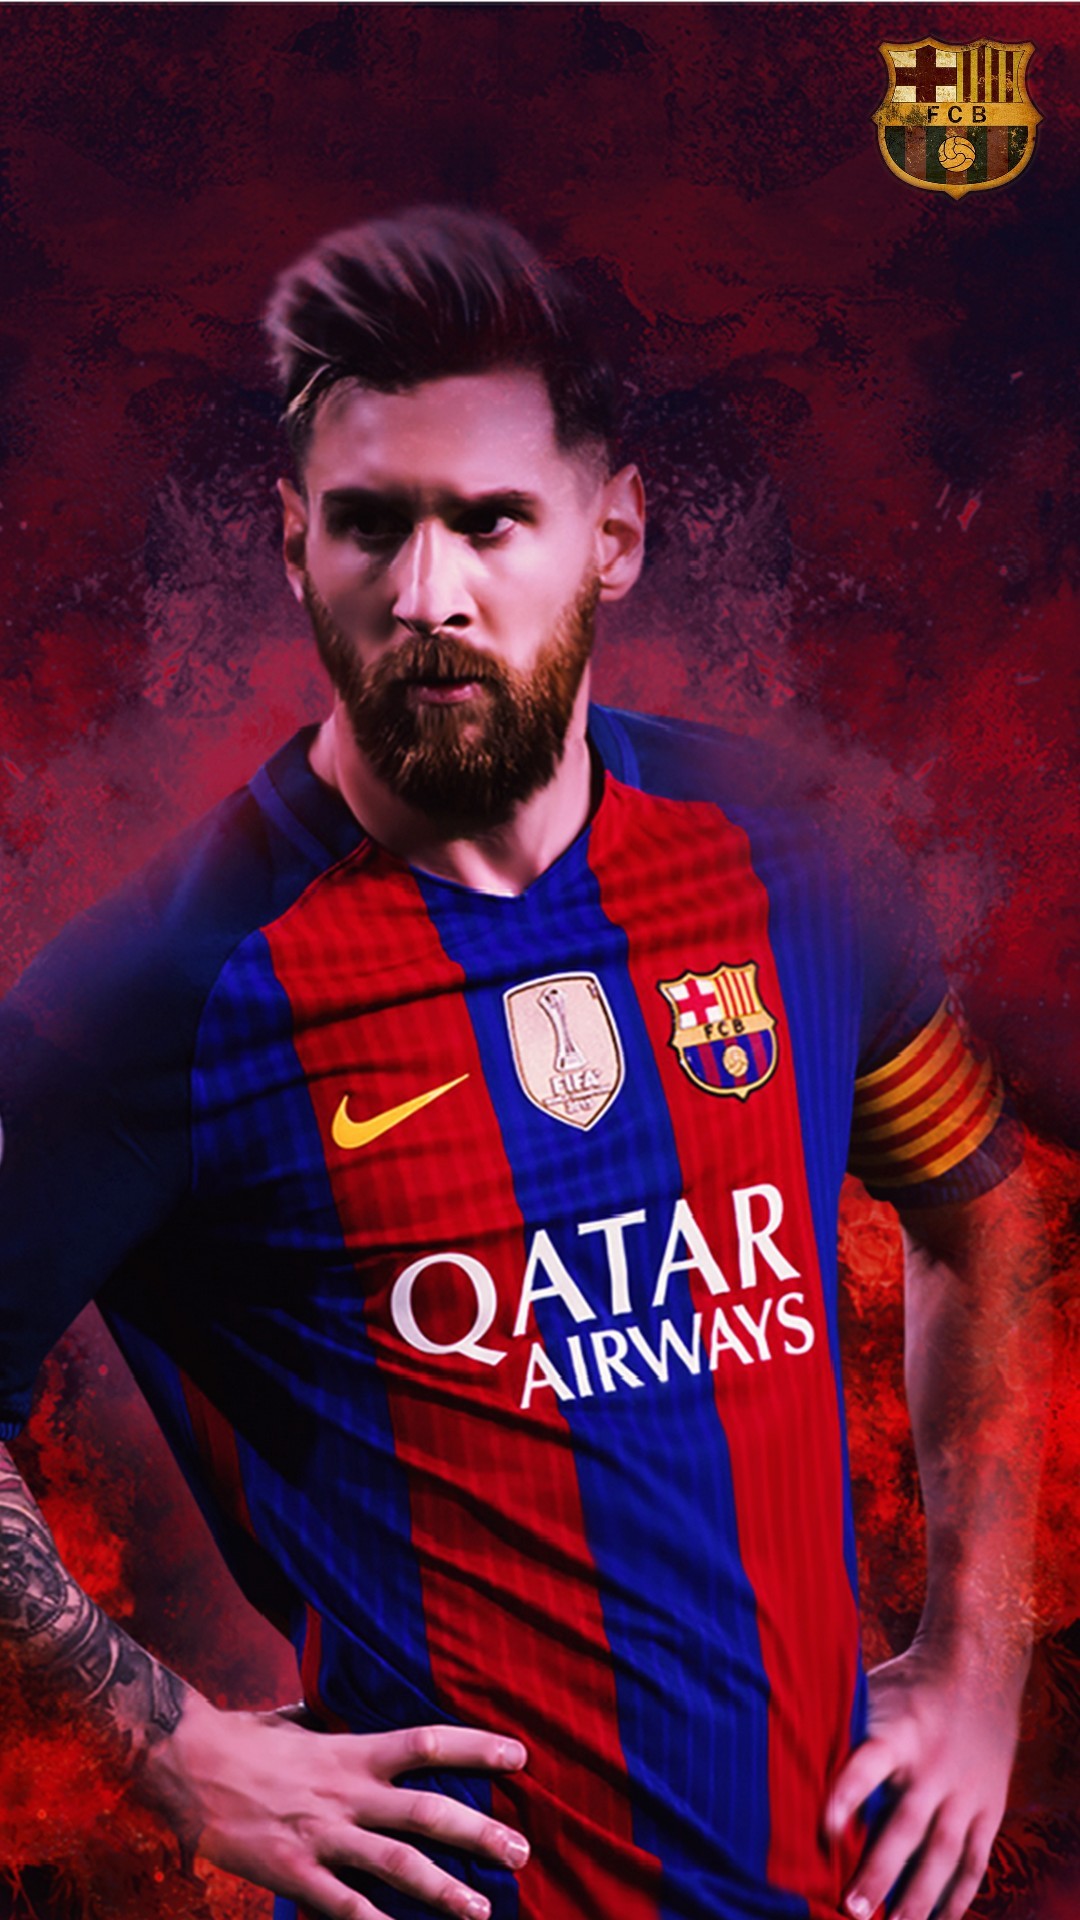 iPhone Wallpaper HD Lionel Messi Barcelona With Resolution 1080X1920 pixel. You can make this wallpaper for your Mac or Windows Desktop Background, iPhone, Android or Tablet and another Smartphone device for free